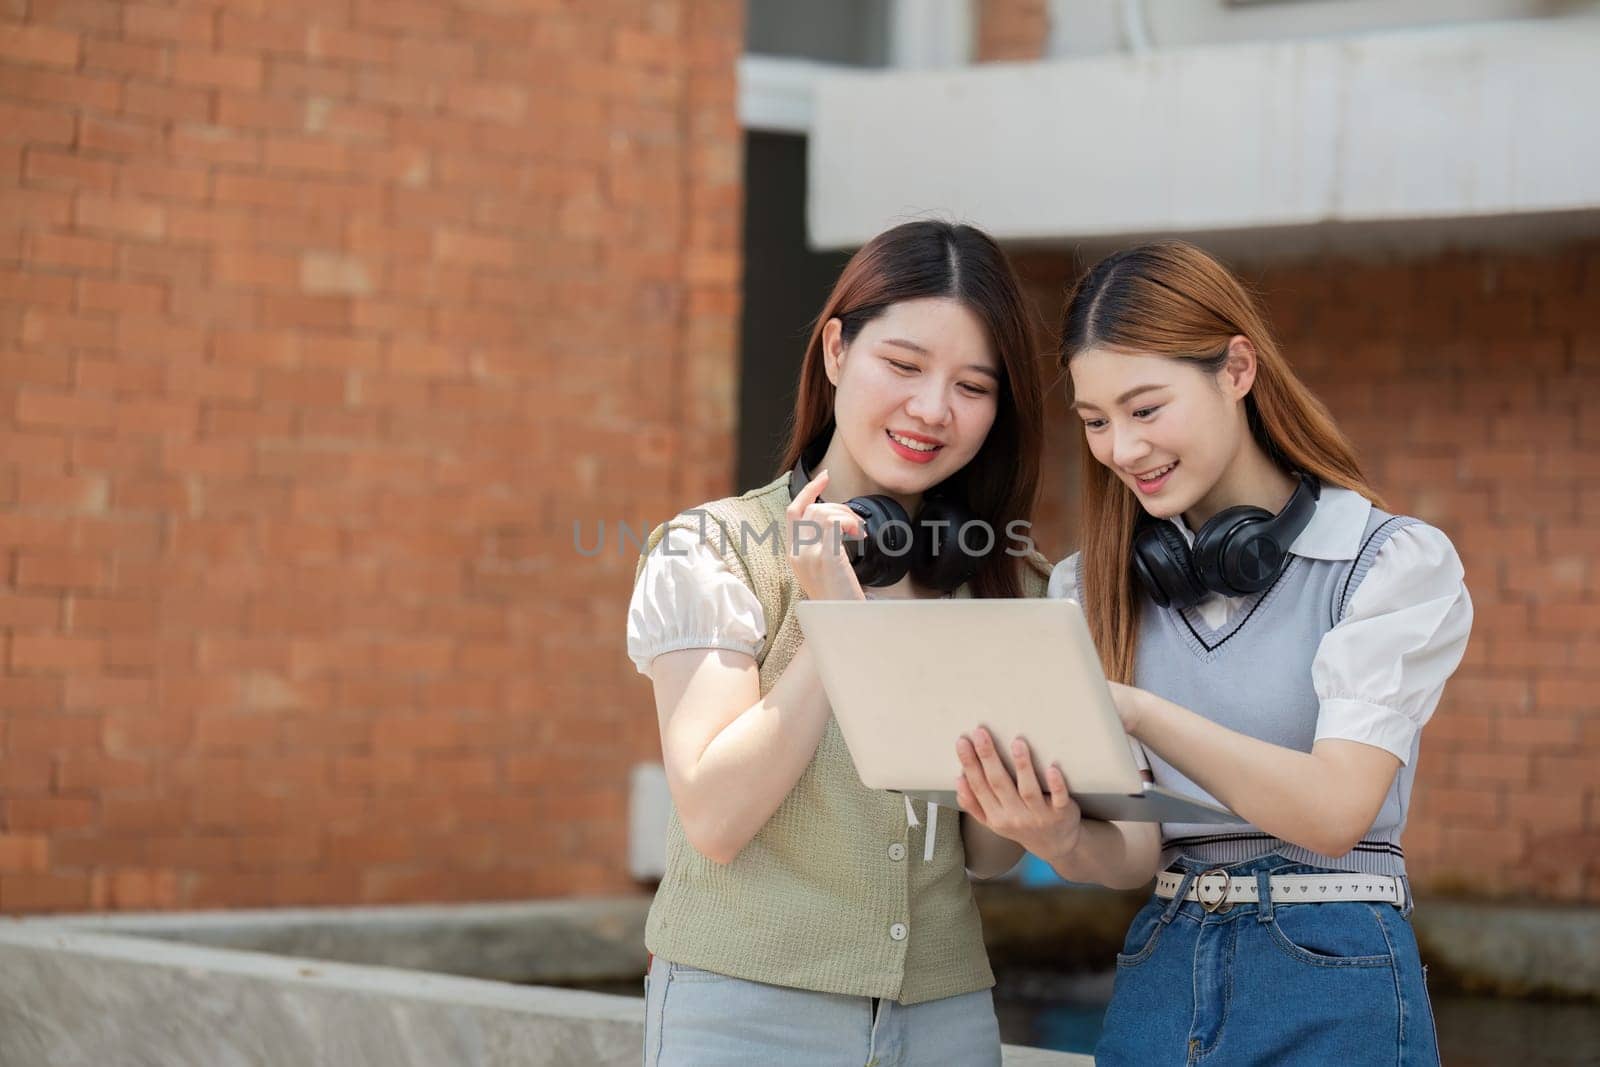 Asian young campus student enjoy learn study and reading books together. Friendship and Education concept. Campus and university.